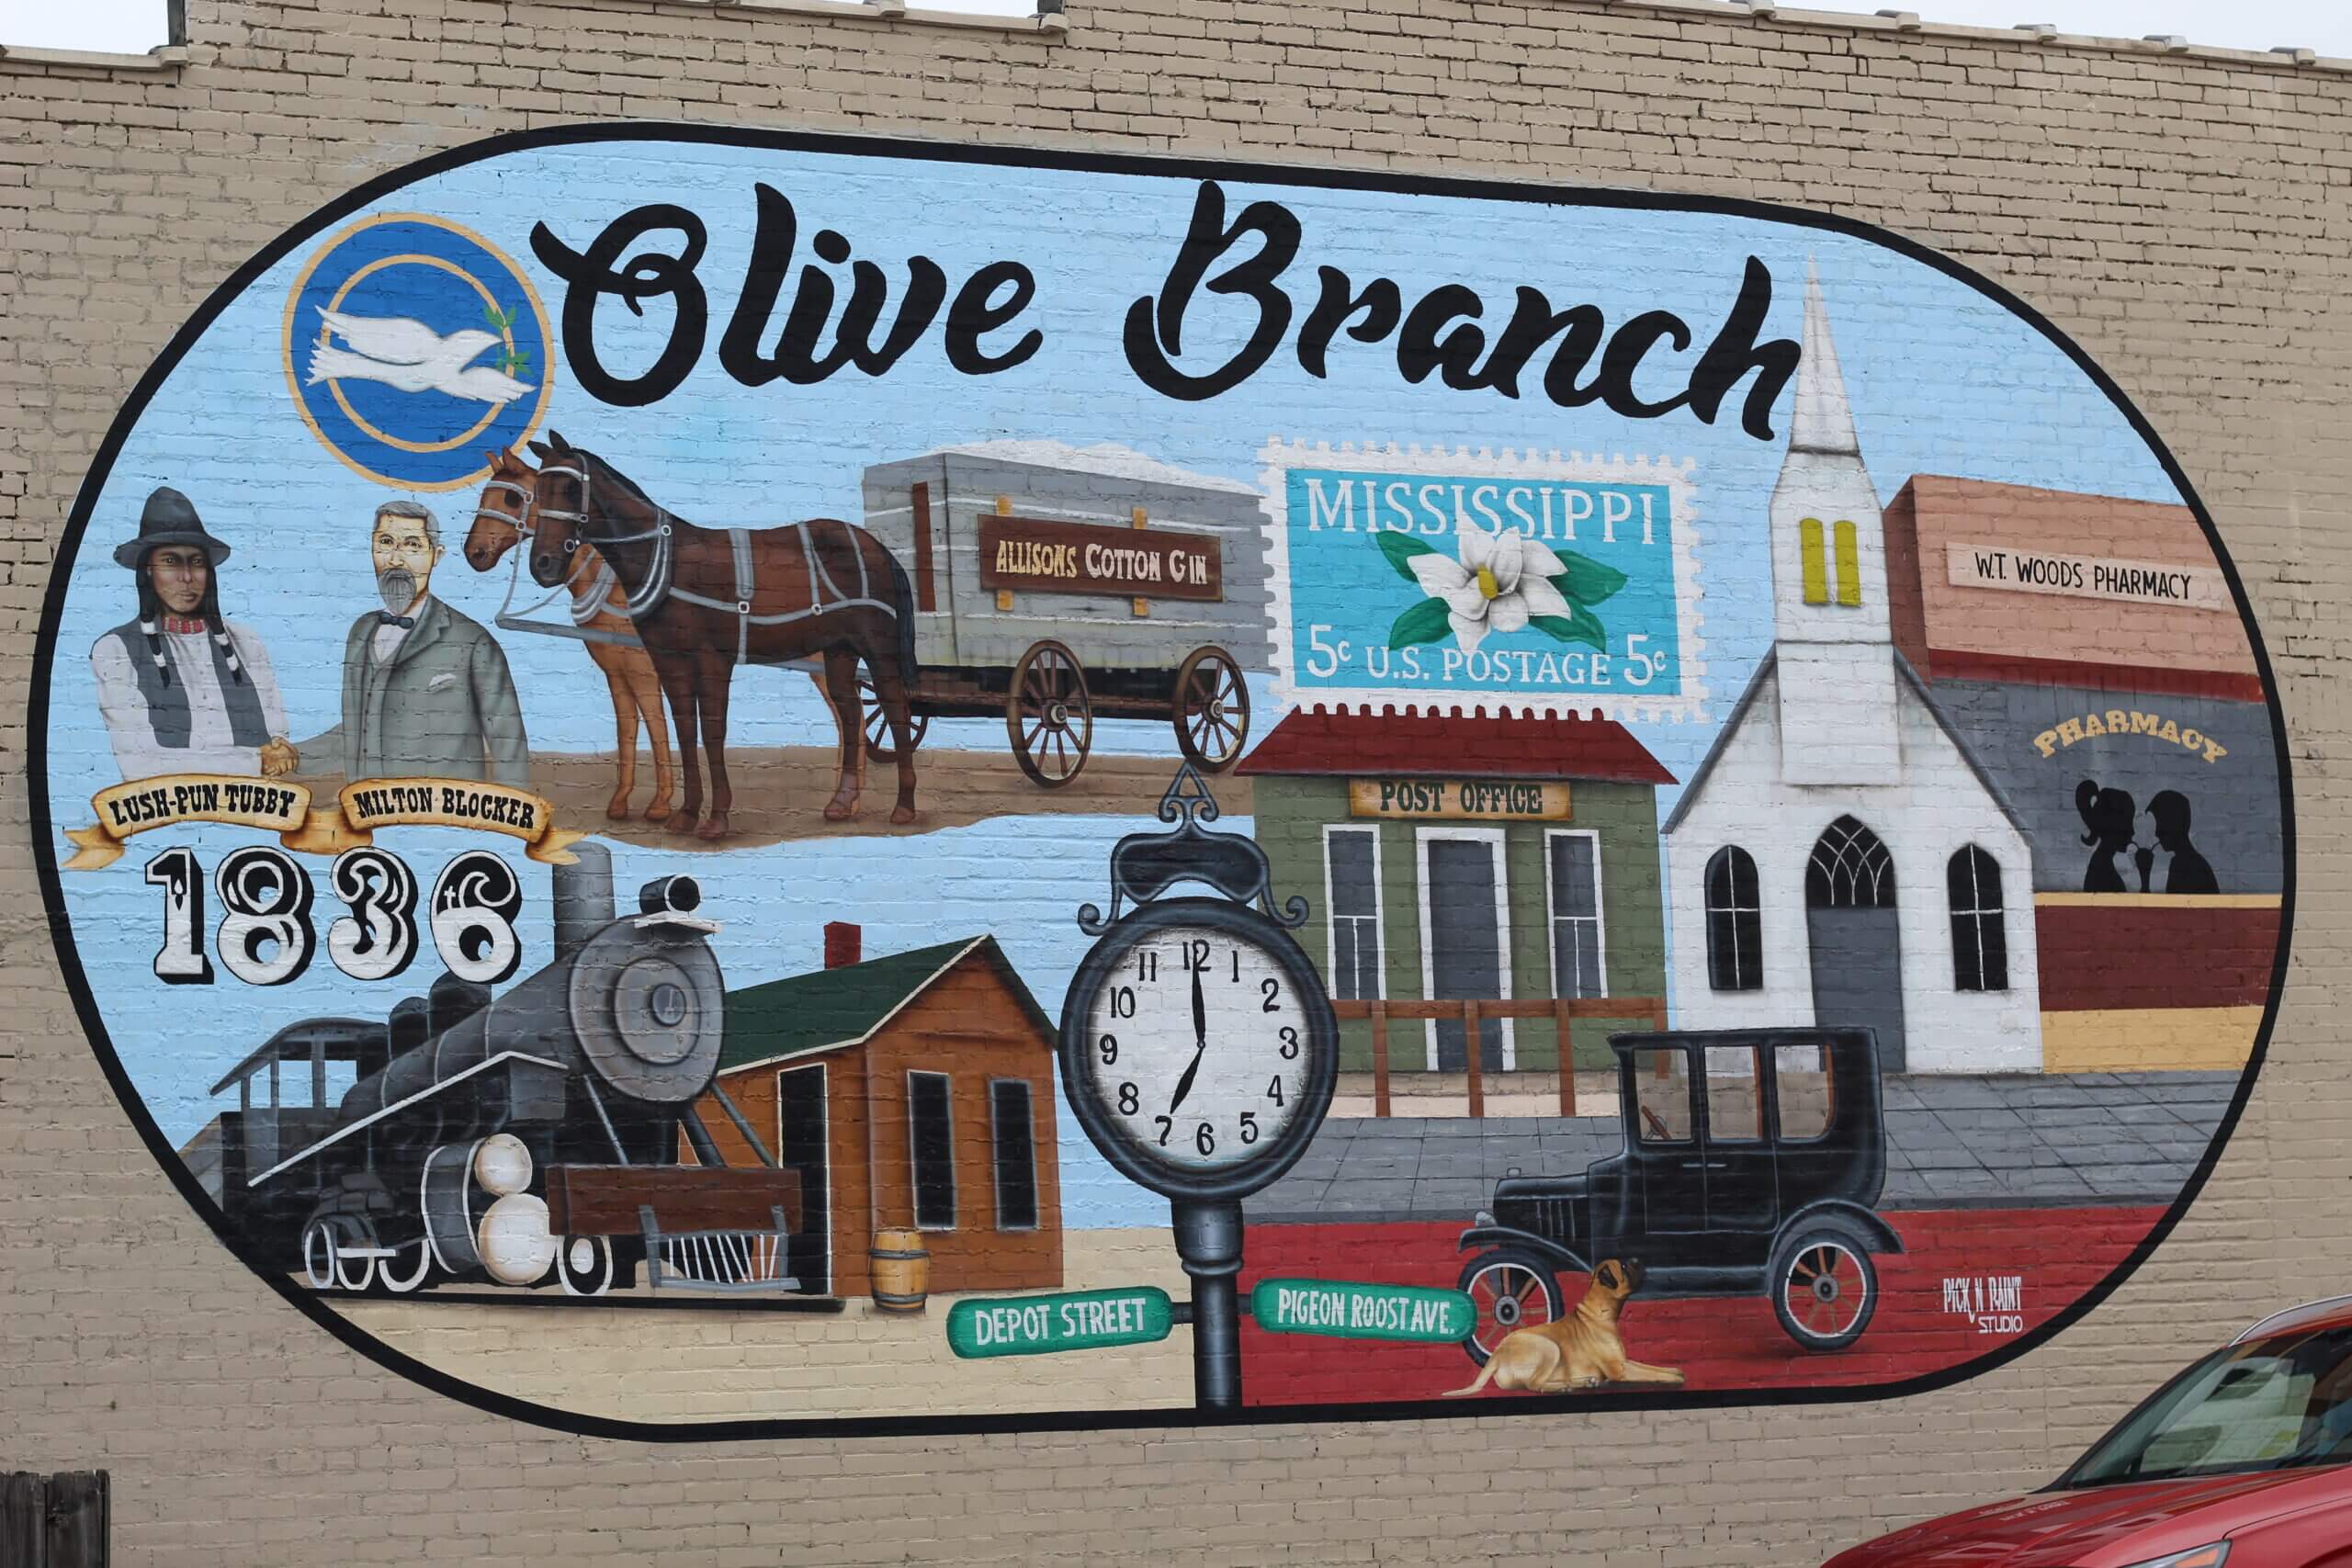 Olive Branch ranked among top cities to raise a family